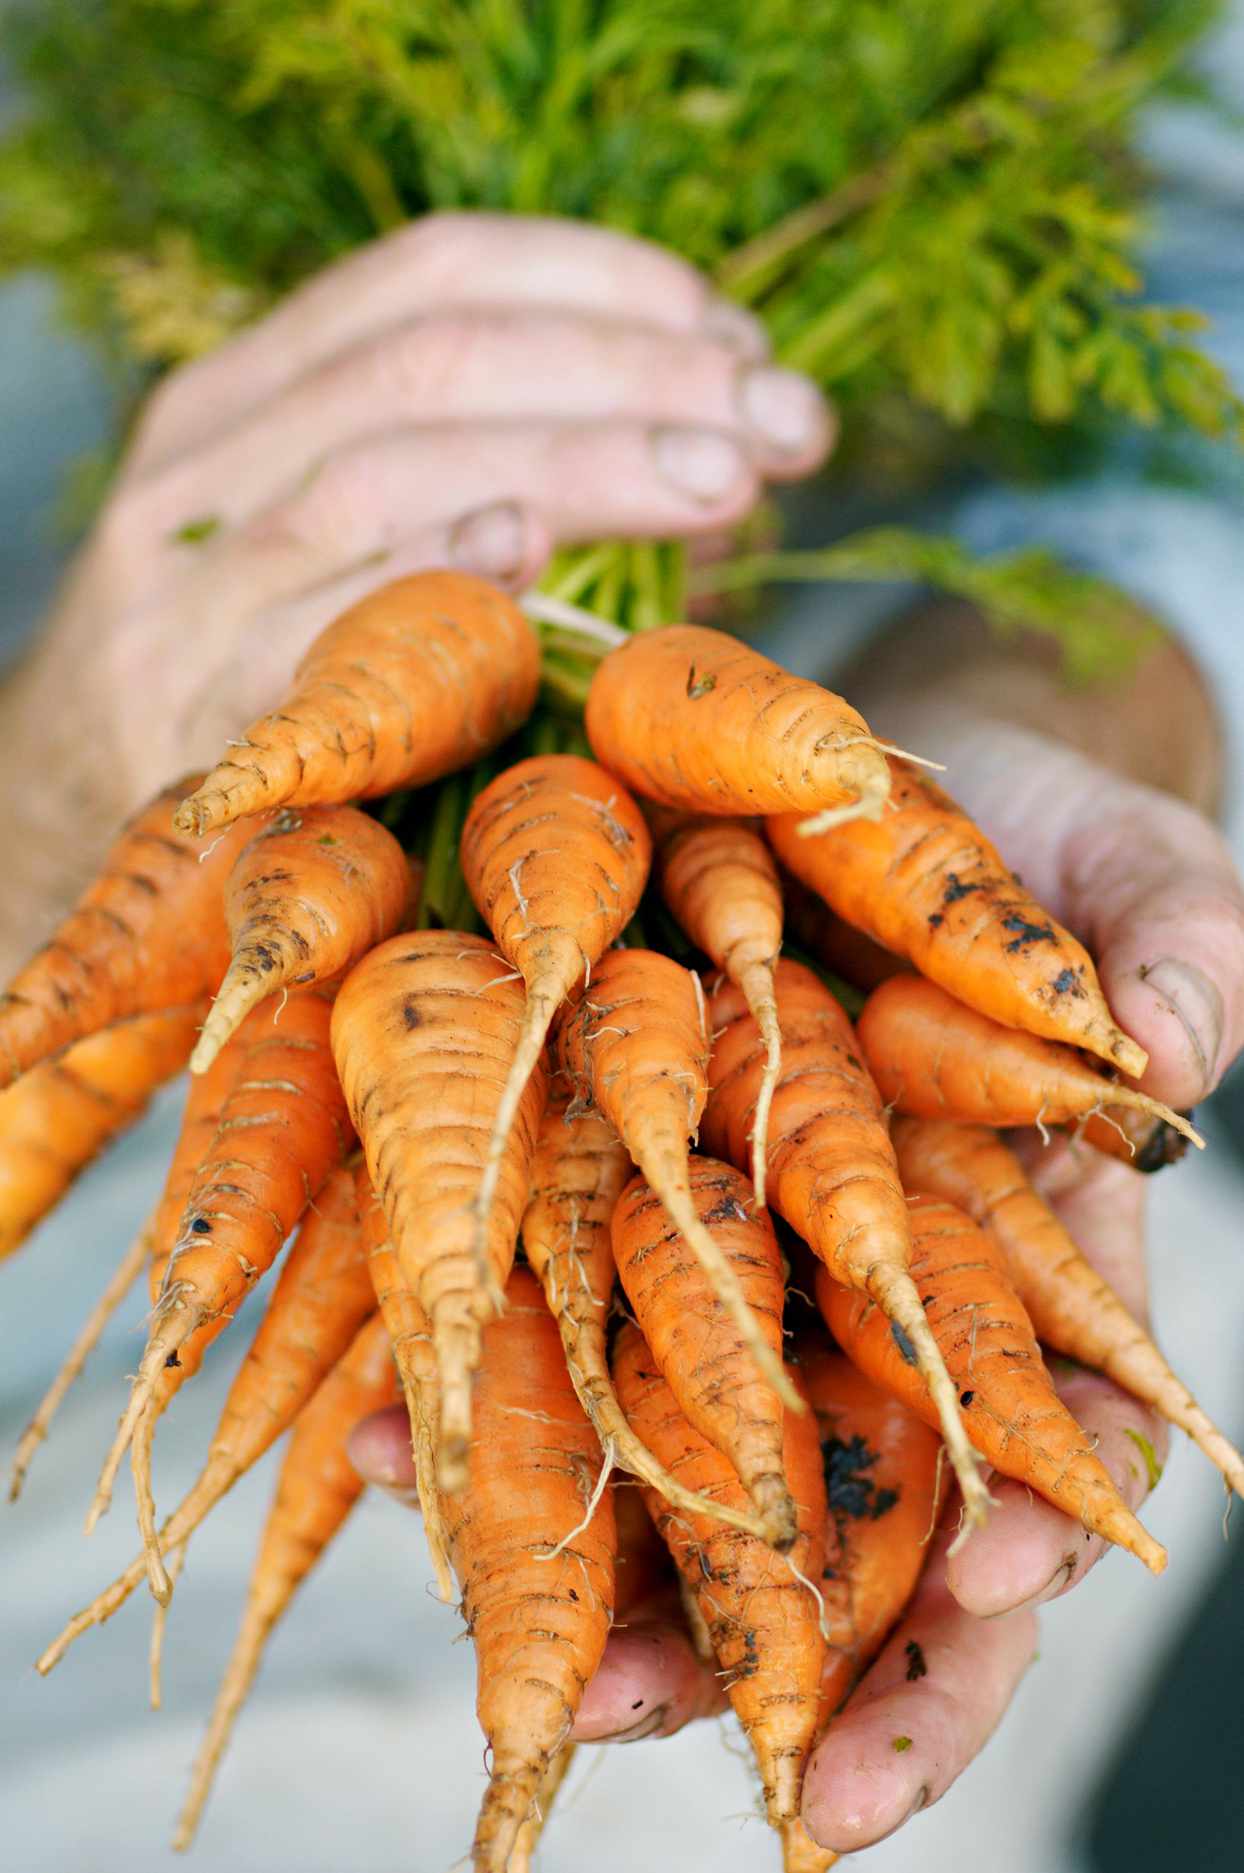 10 Best Carrot Companion Plants to Grow for a Bigger Harvest